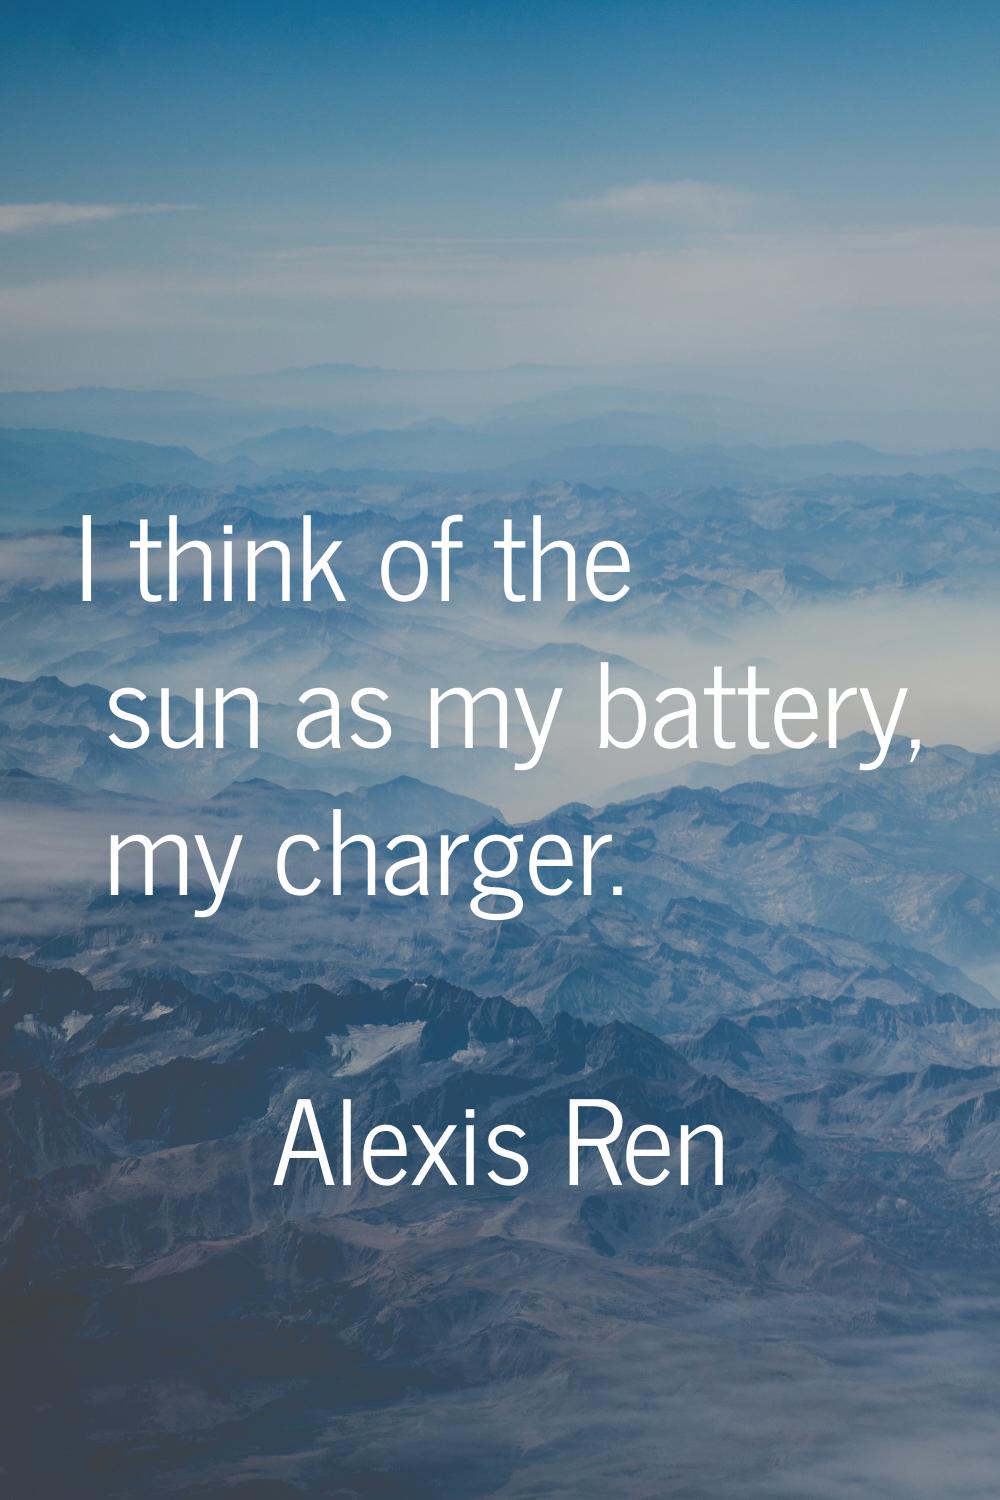 I think of the sun as my battery, my charger.